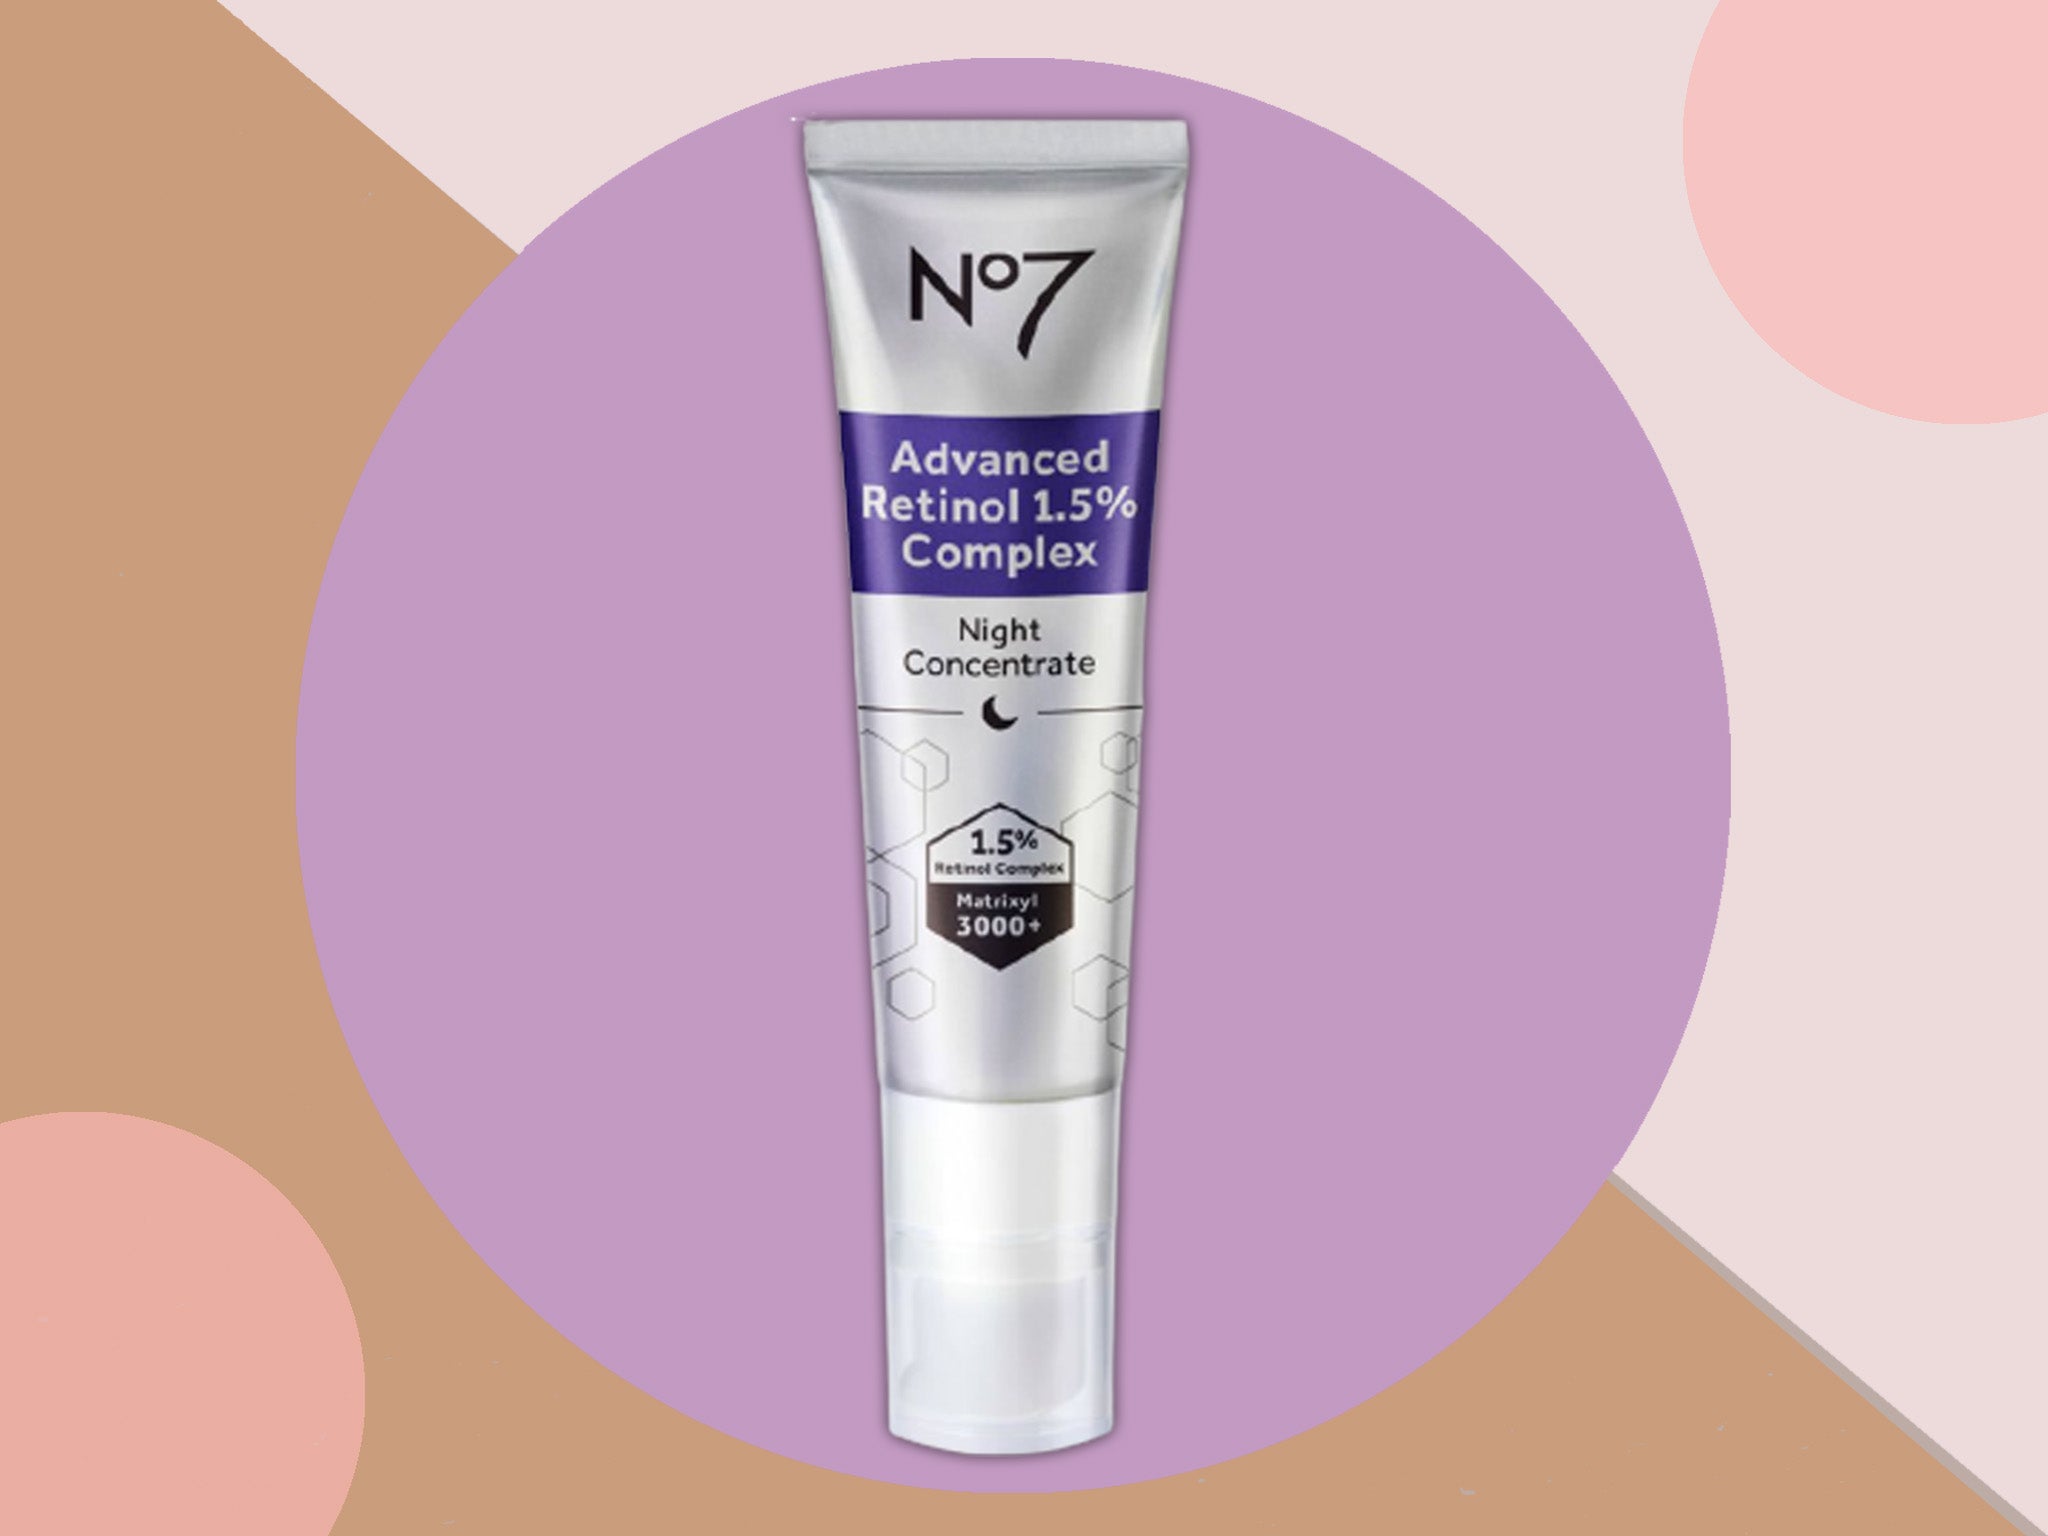 Not only is this product an absolute steal, but it will also make a difference to your skin